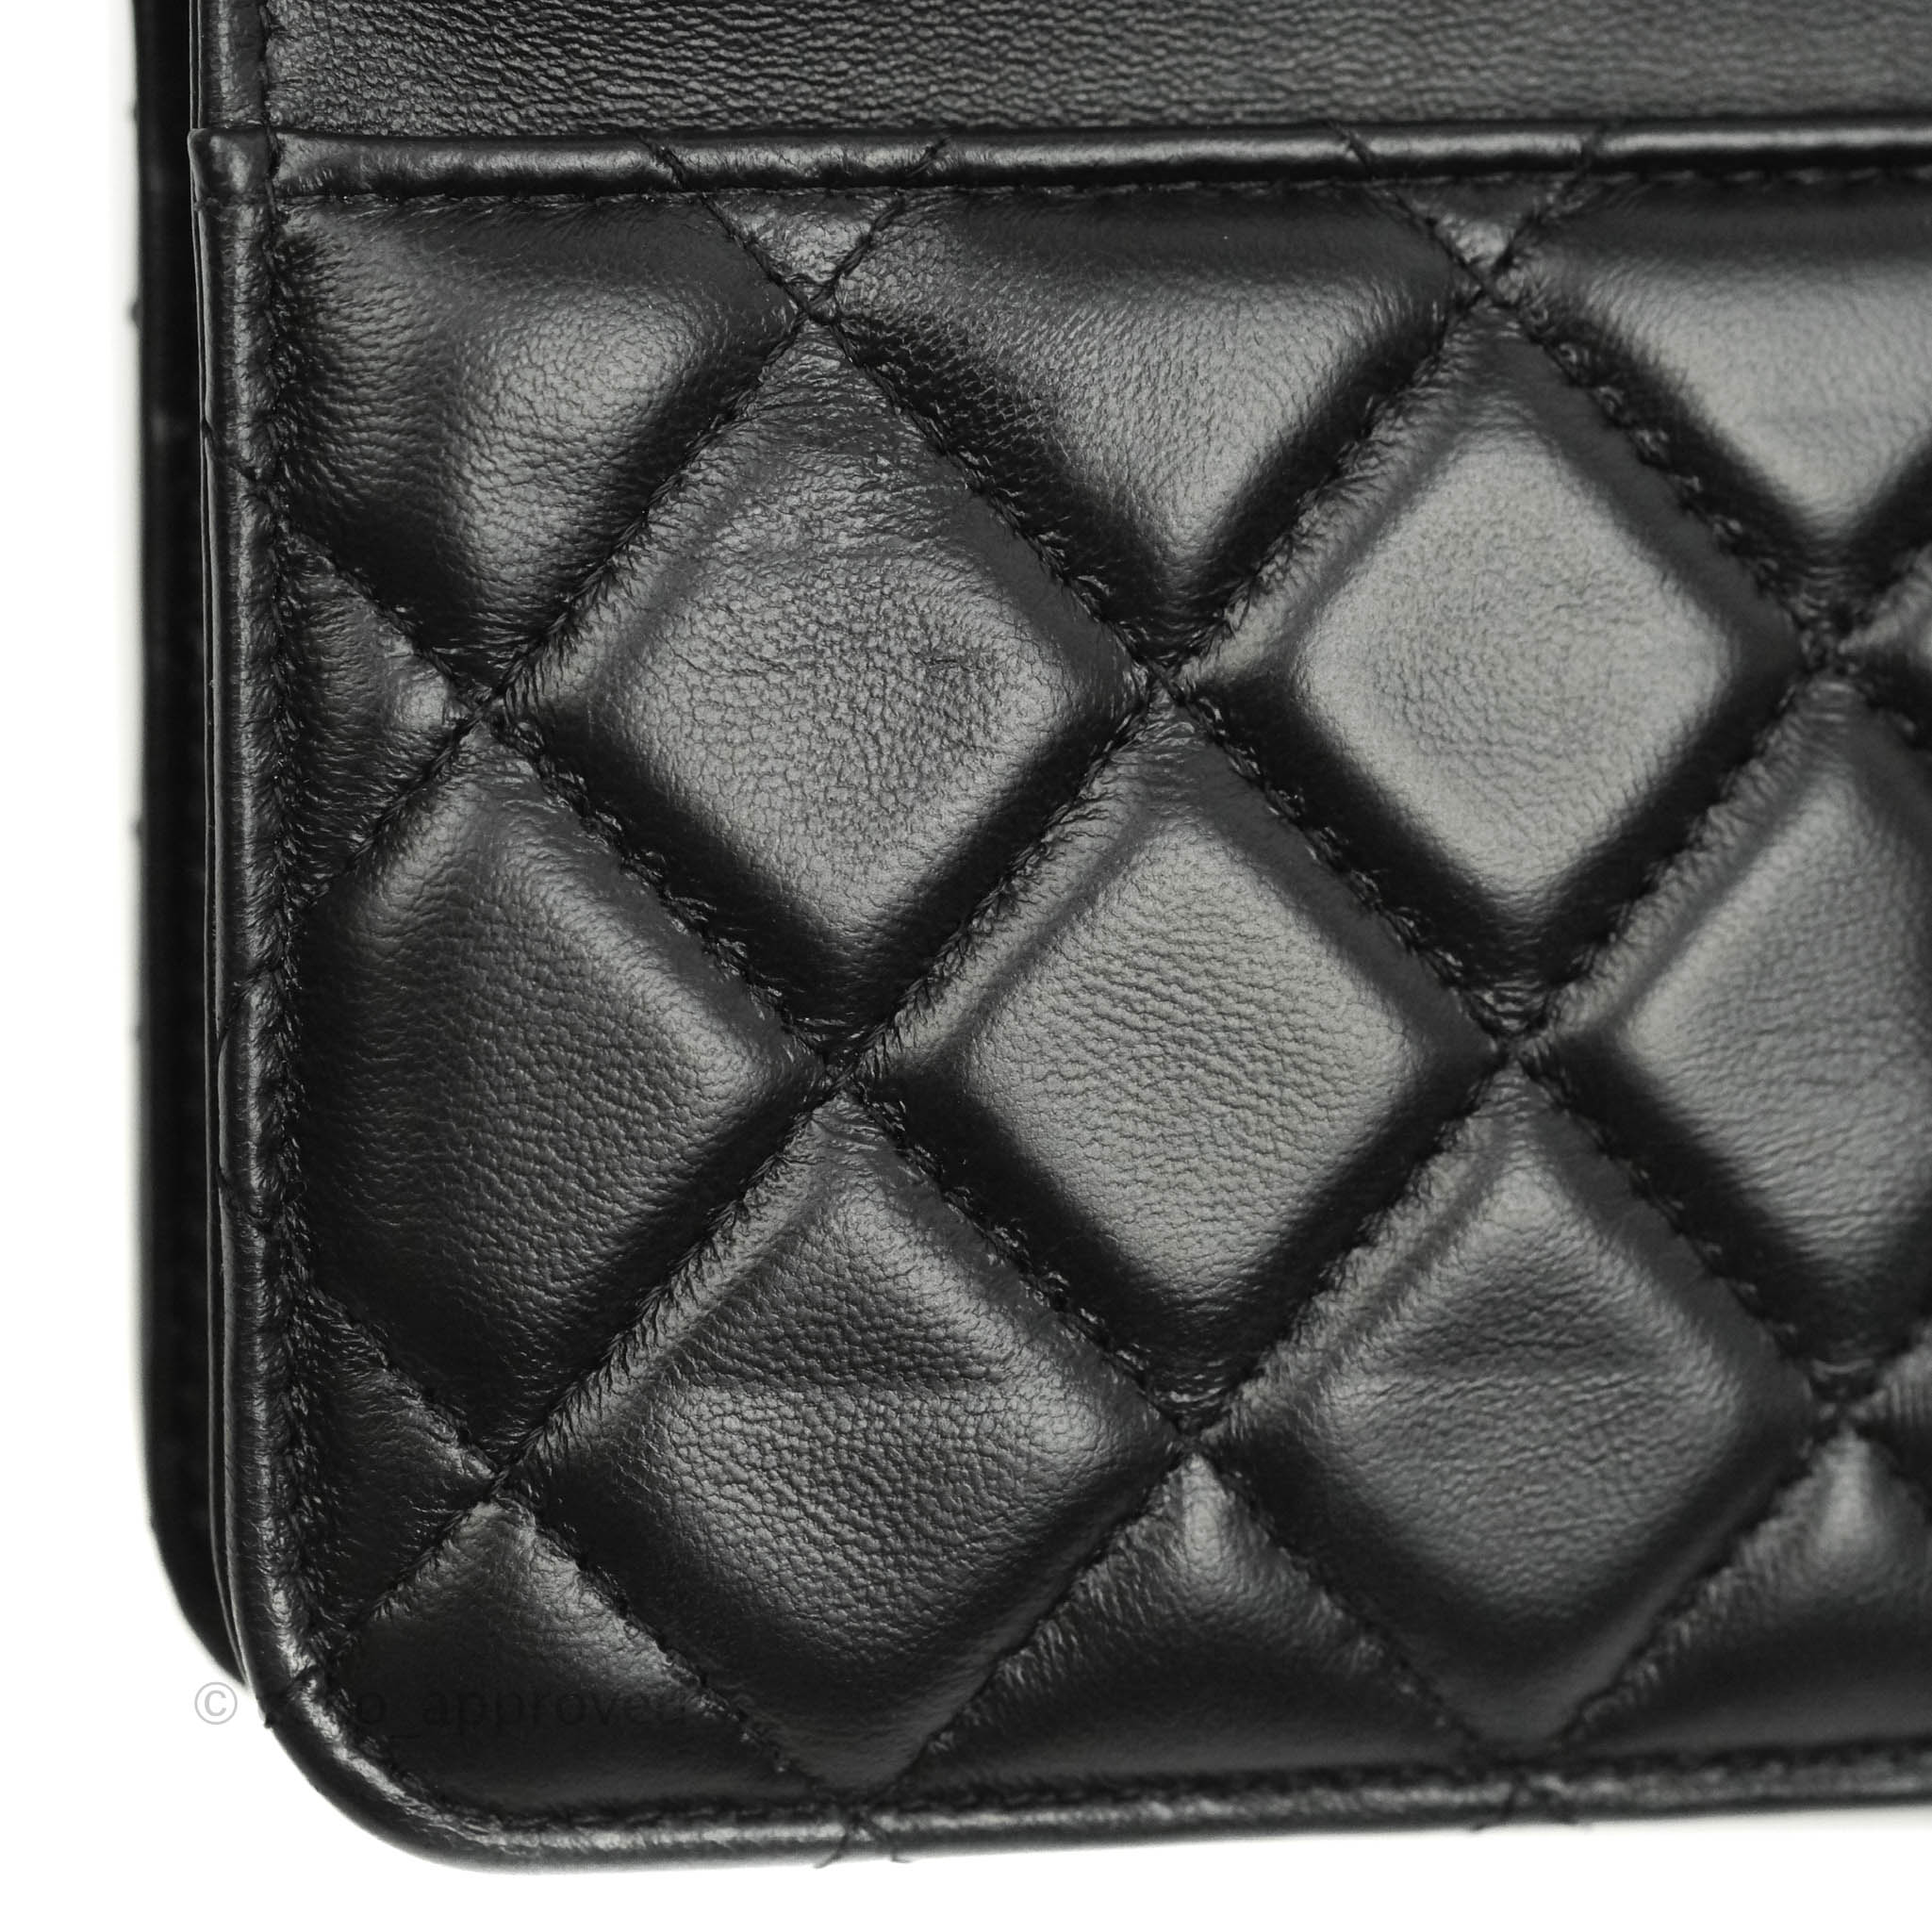 Chanel Blue Quilted Lambskin Wallet on Chain (WOC) Q6AATL0FBB002